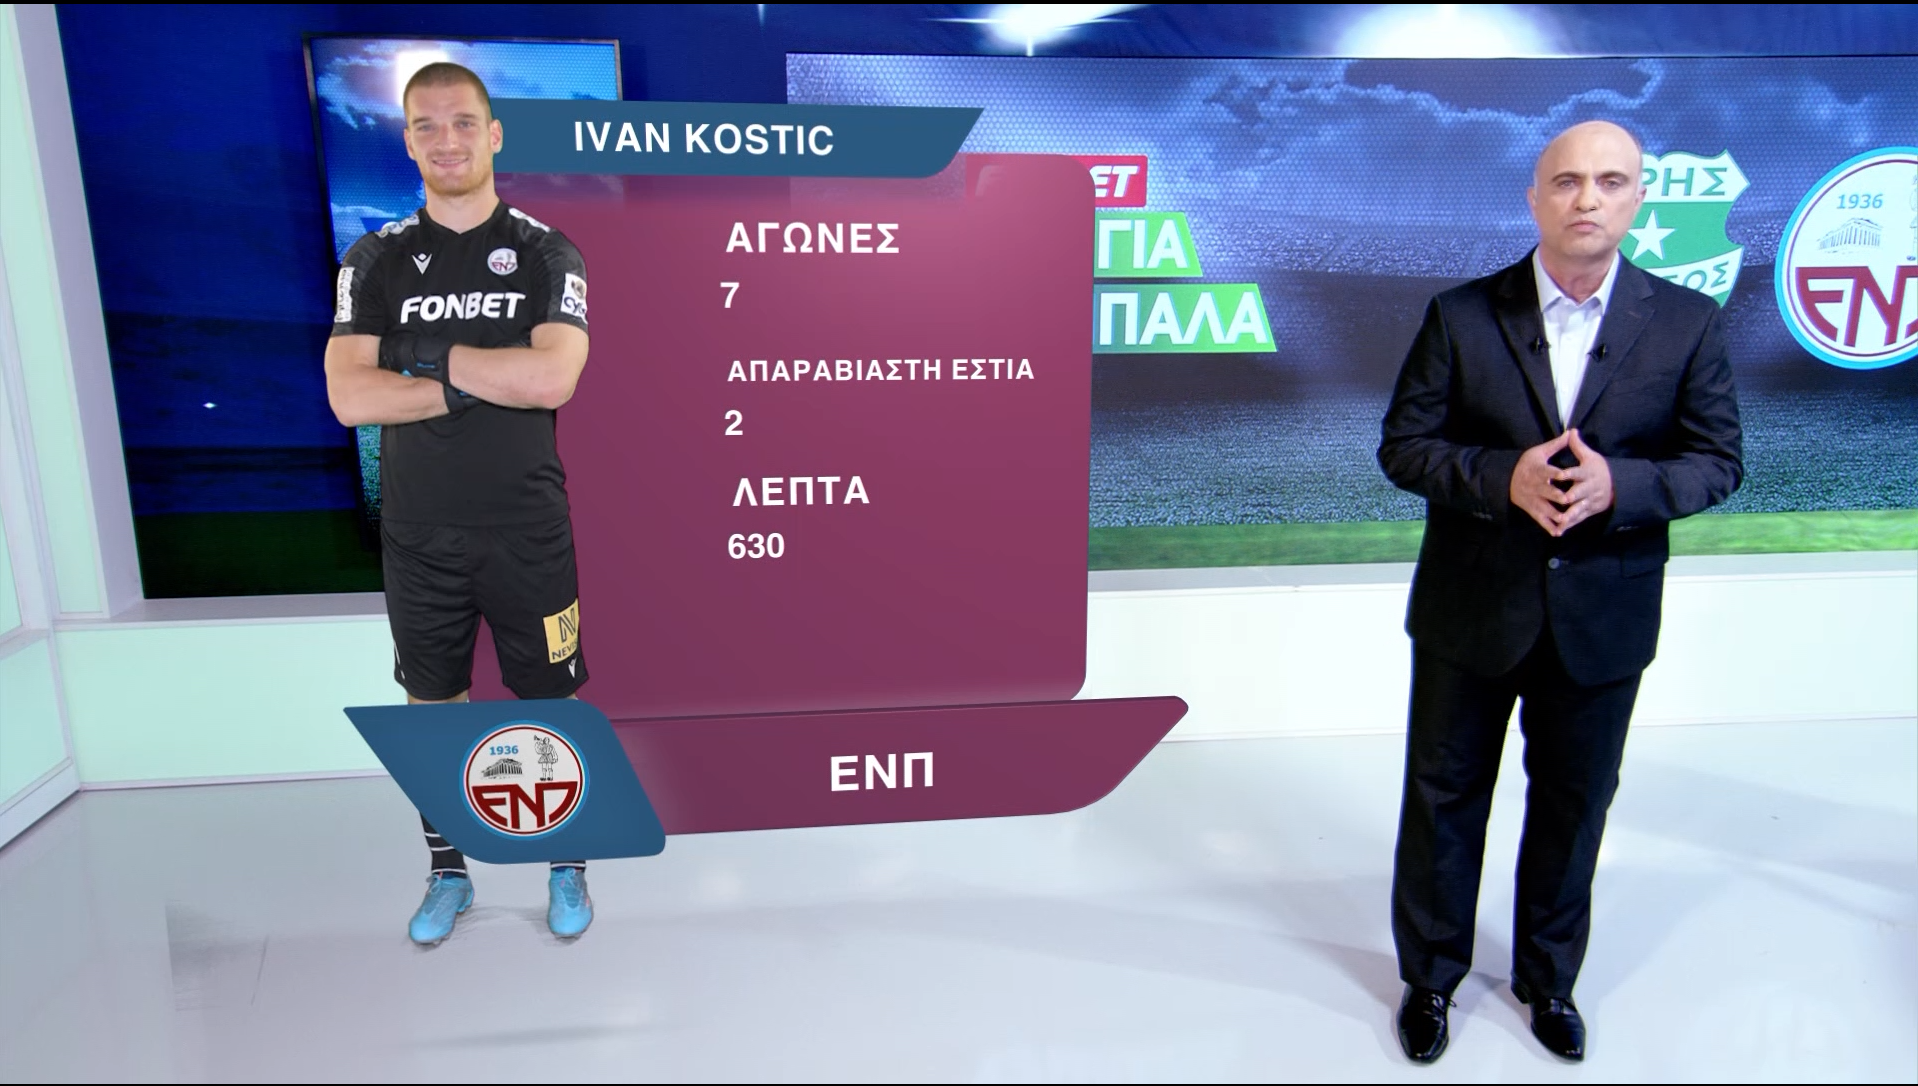 Cytavision Sports Channels Launch New Graphics with RT Software